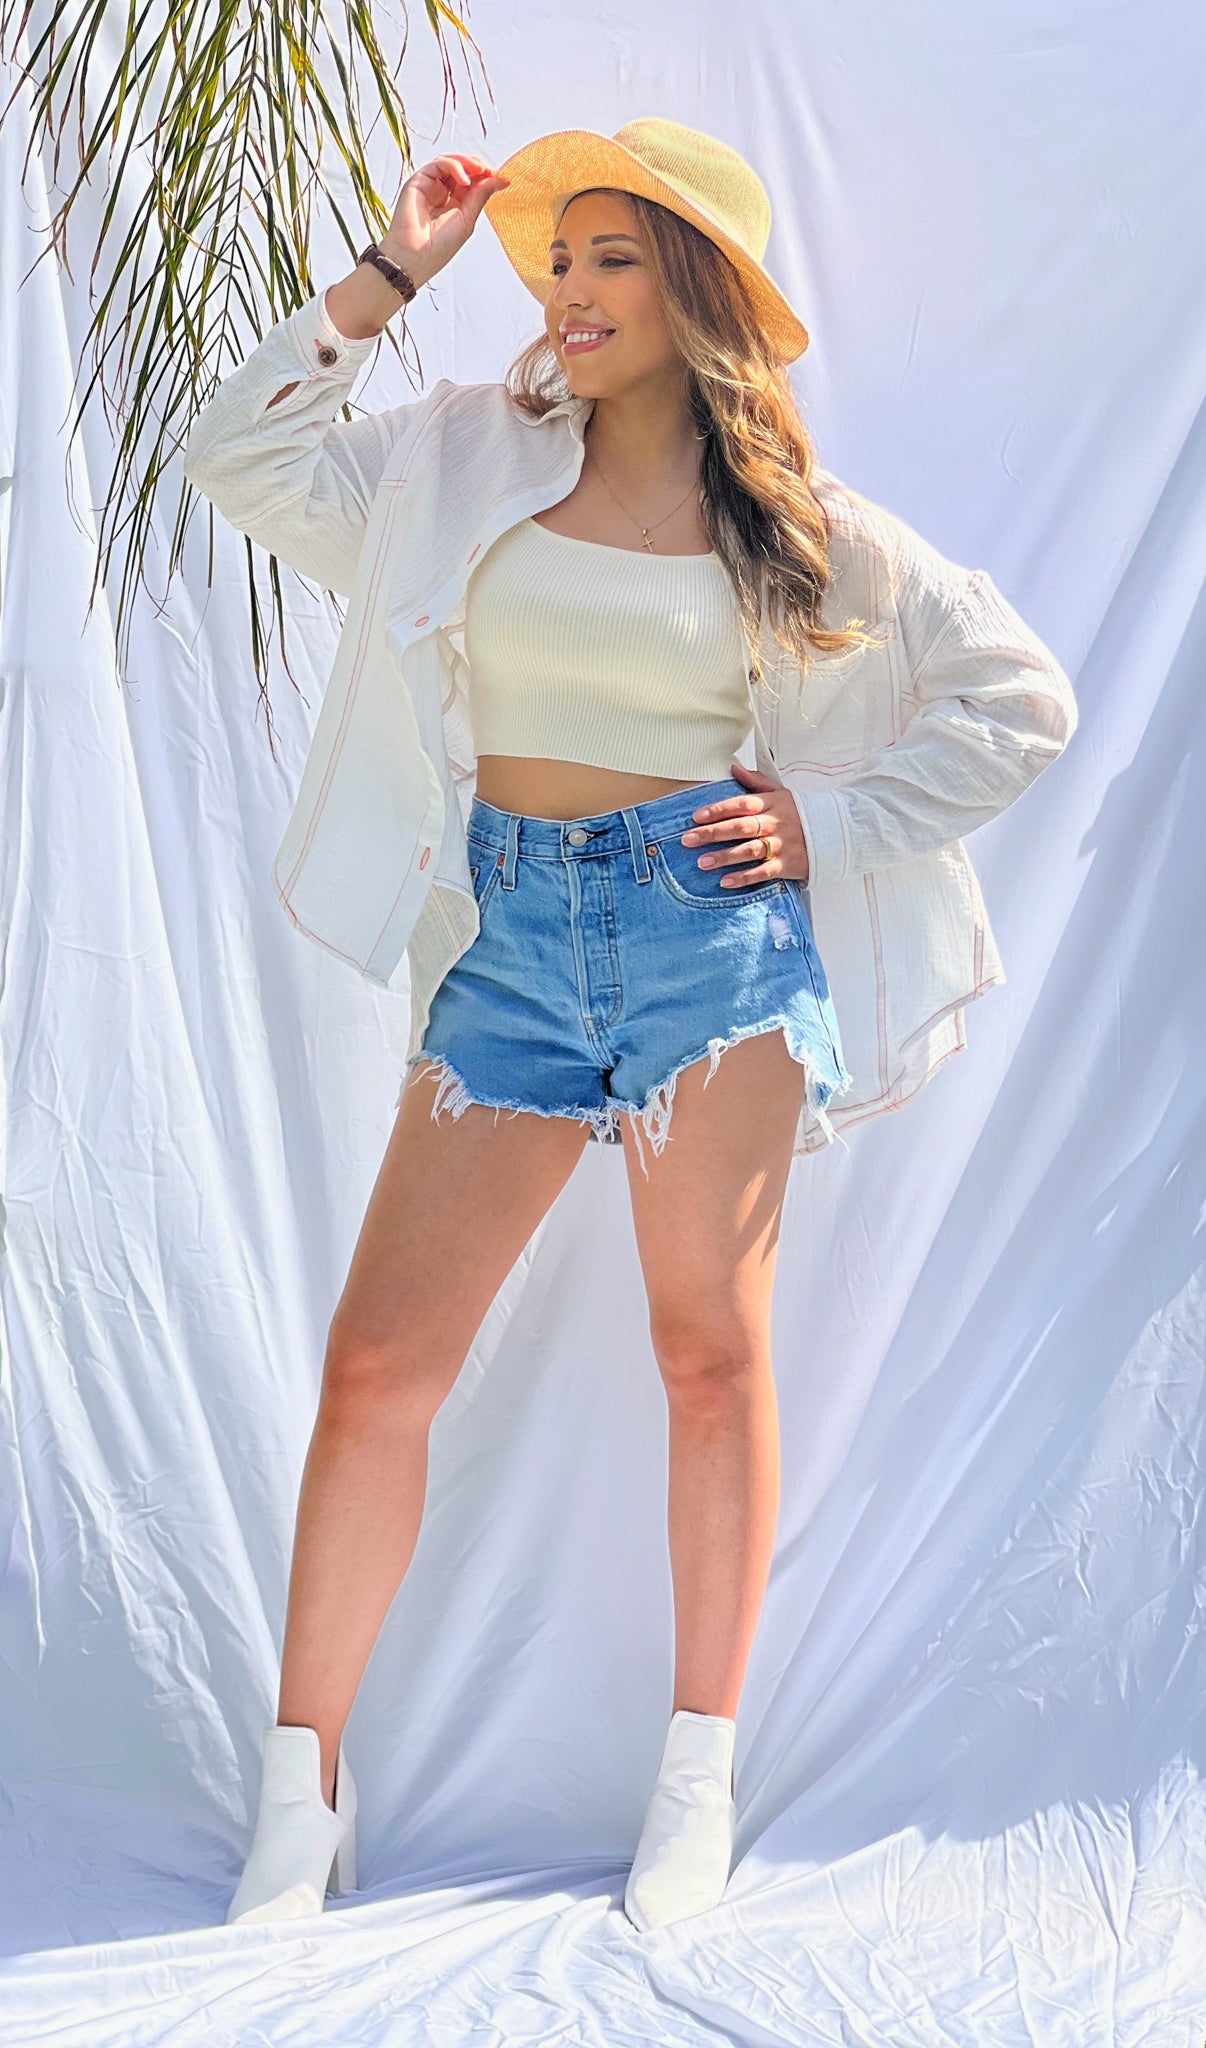 A latina model is wearing an off-white ribbed knit crop top. It has a square neckline and wide shoulder straps. She is modeling it with denim shorts and a white pull-over oversized shirt. Hit the beach in our "Chasing Sunsets Ribbed Knit Top". Get creative and style it for a day to night look! Beautiful square neck, with wide shoulders straps, and cropped hem. Stretchy ribbed knit provides a flattering fit. Square Neck. Wide Shoulder Straps. 56% Rayon, 22% Nylon, and 22% Polyester Model wearing size small.